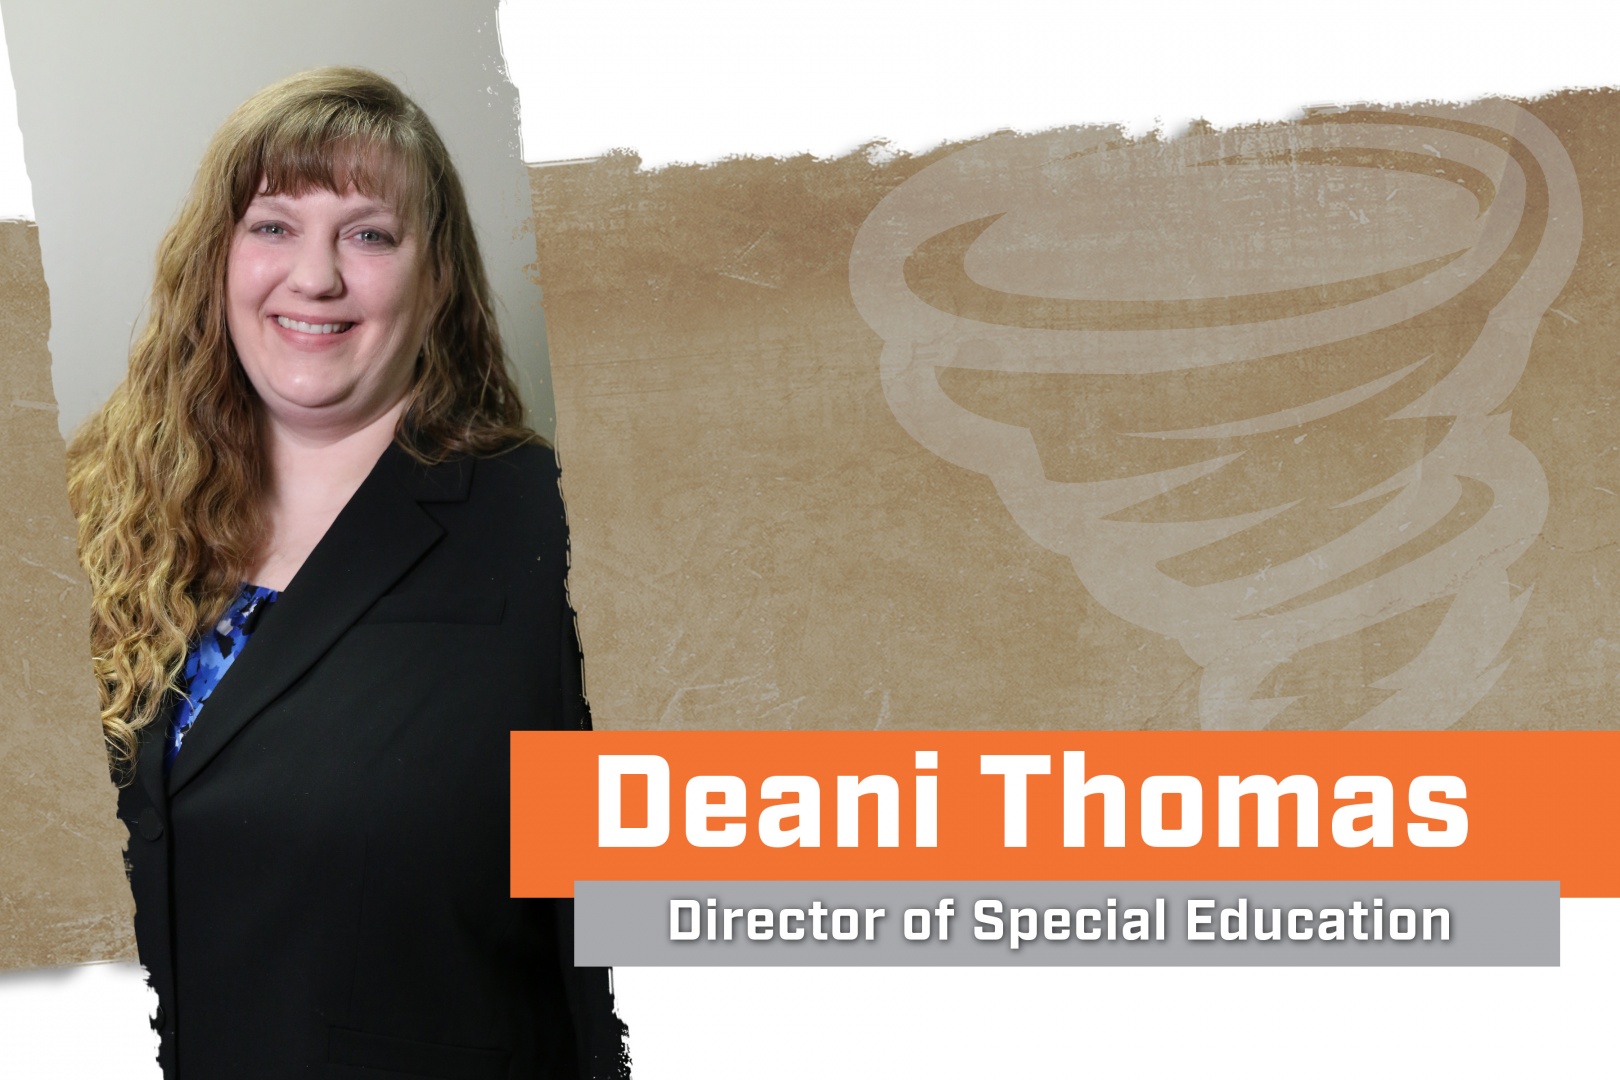 Deani Thomas named as new Director of Special Education